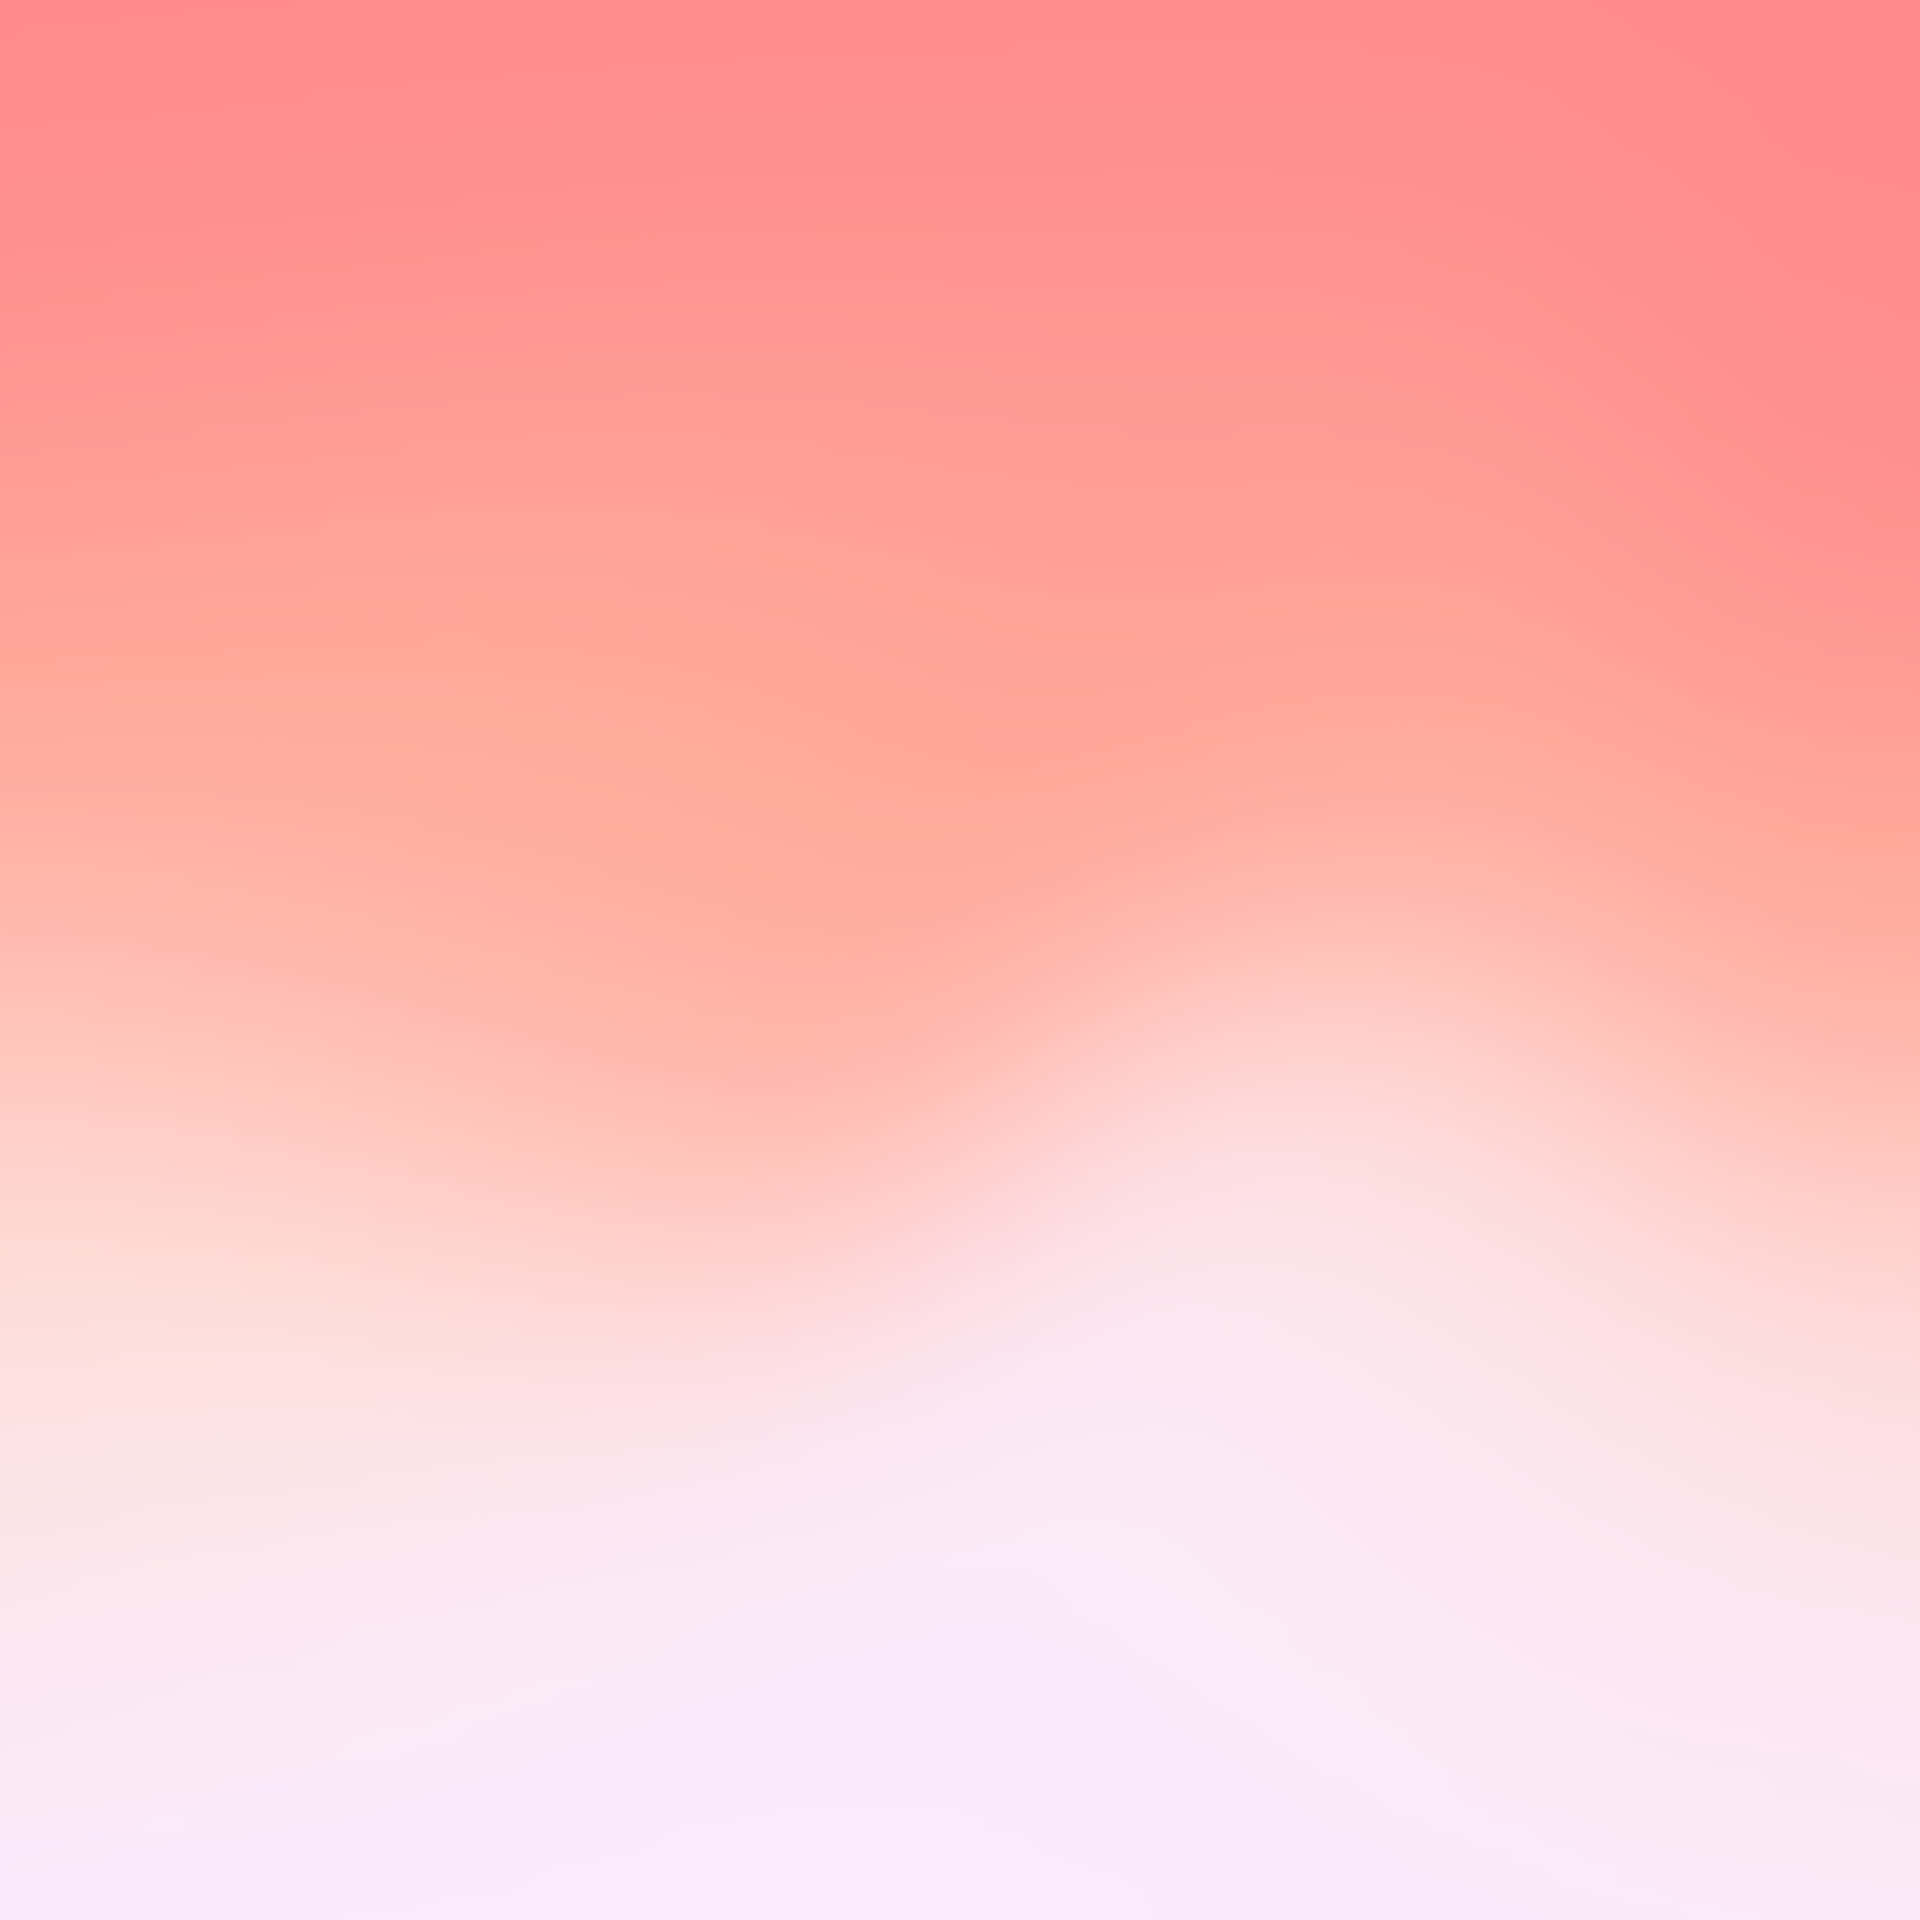 A Pink And White Gradient Background Wallpaper